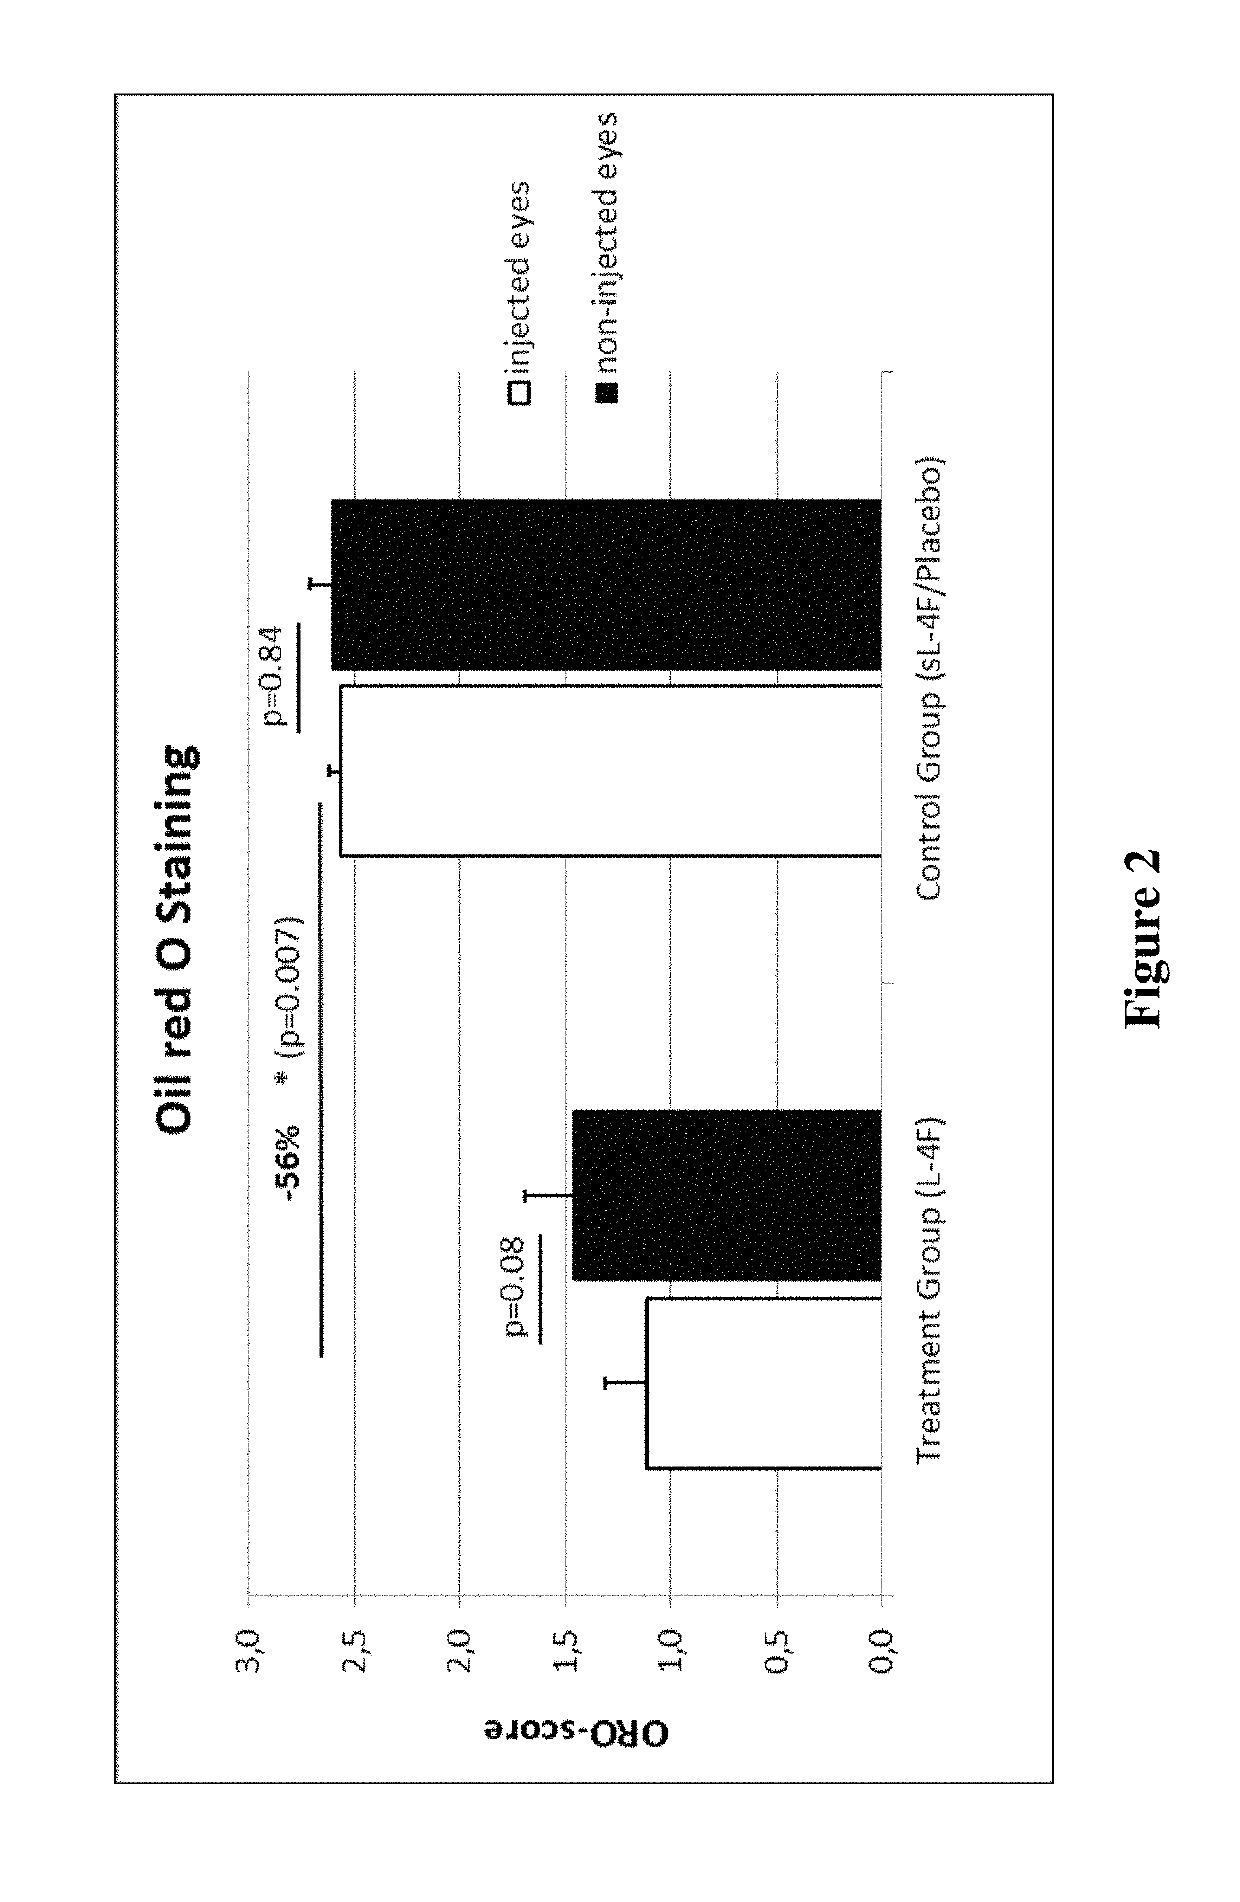 Treatment of age-related macular degeneration and other eye diseases with apolipoprotein mimetics